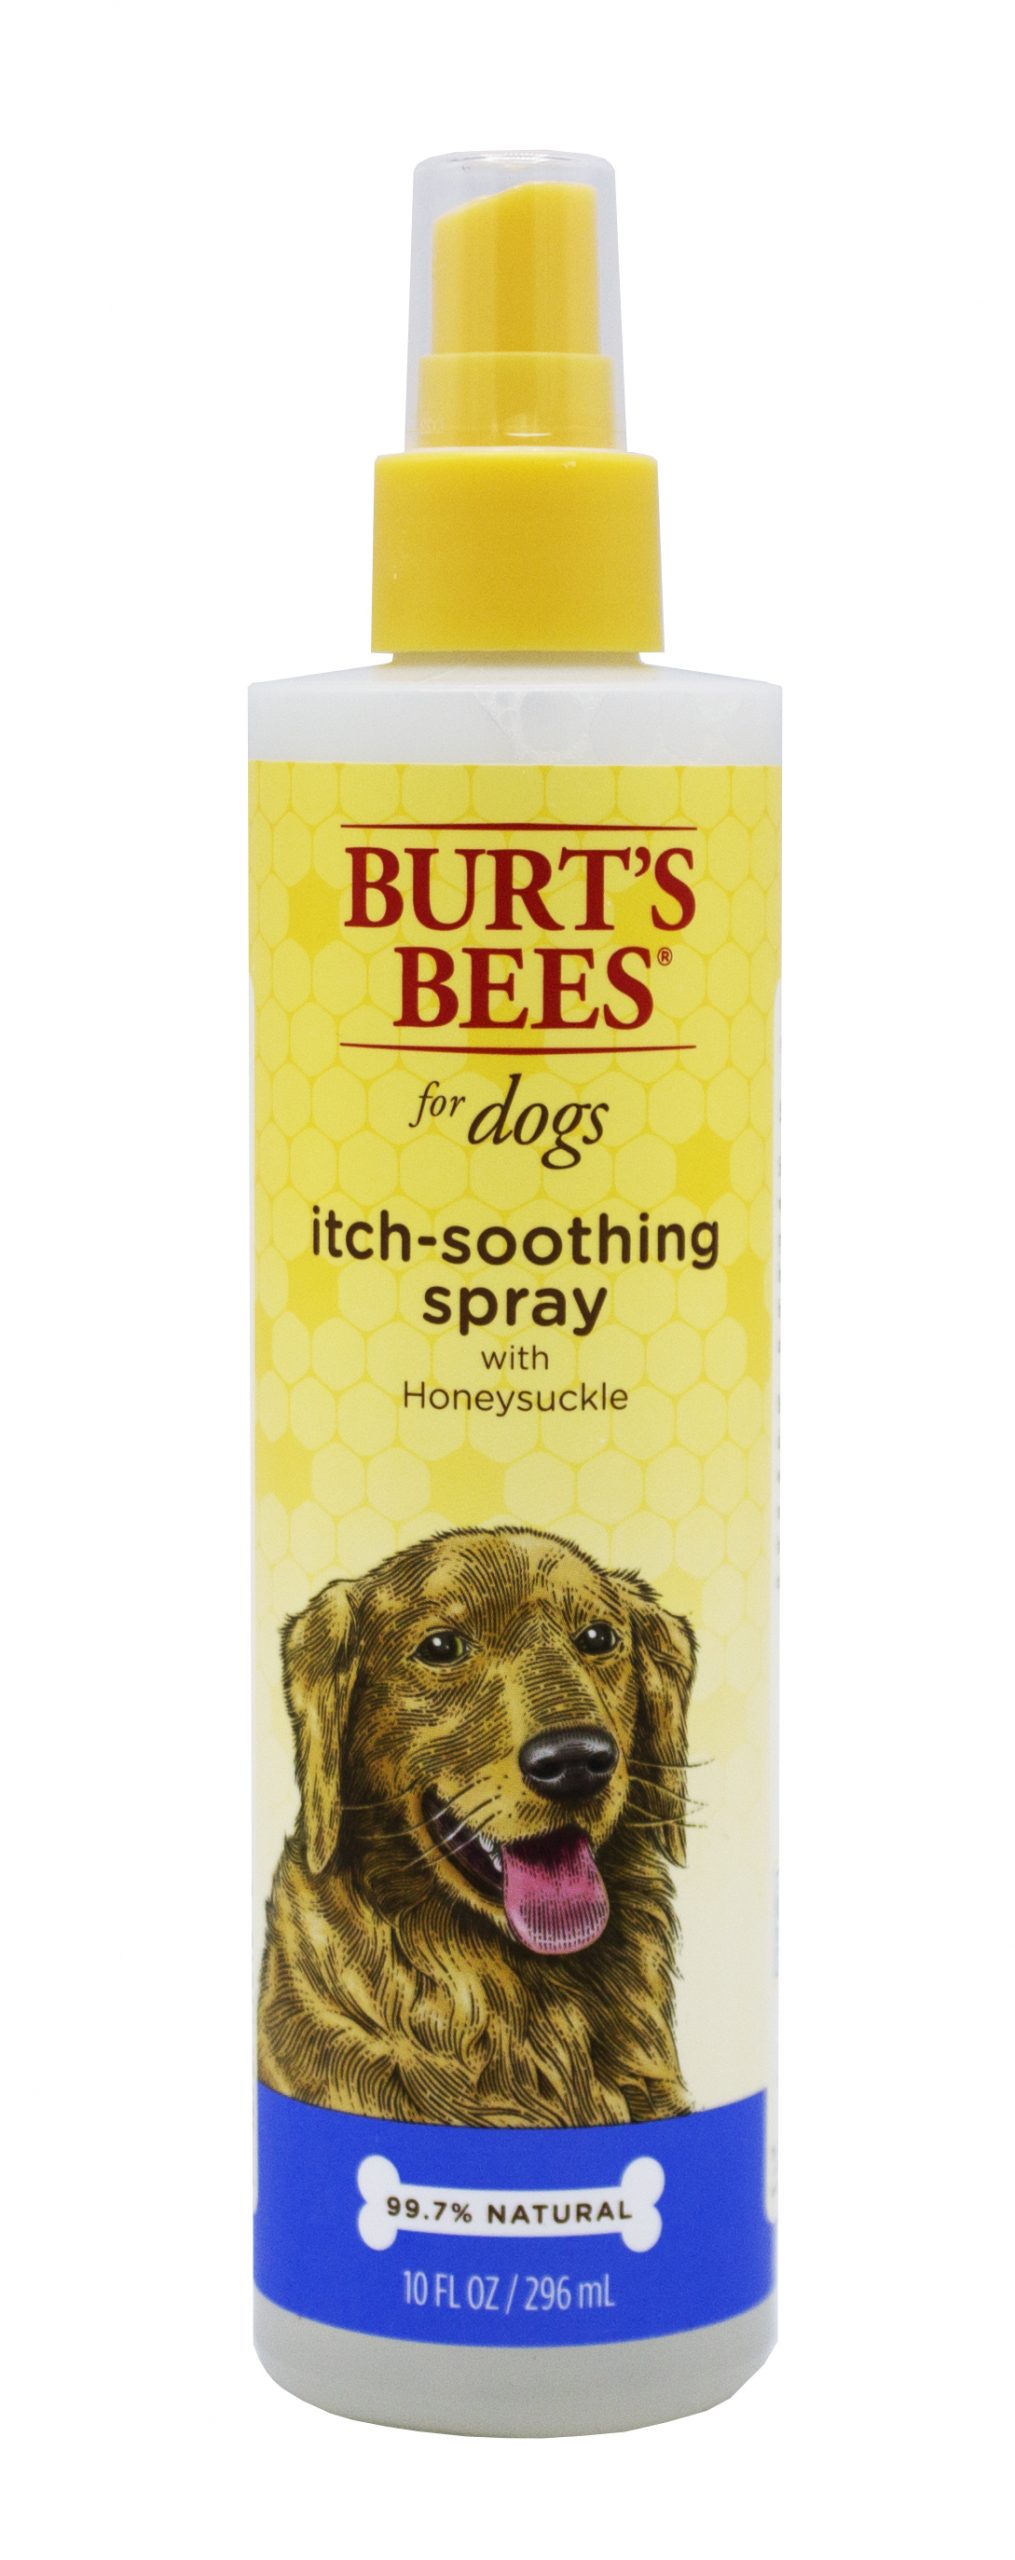 Burt's Bees Dog and Puppy Anti-Itch Spray Only $2.24! - Freebies2Deals